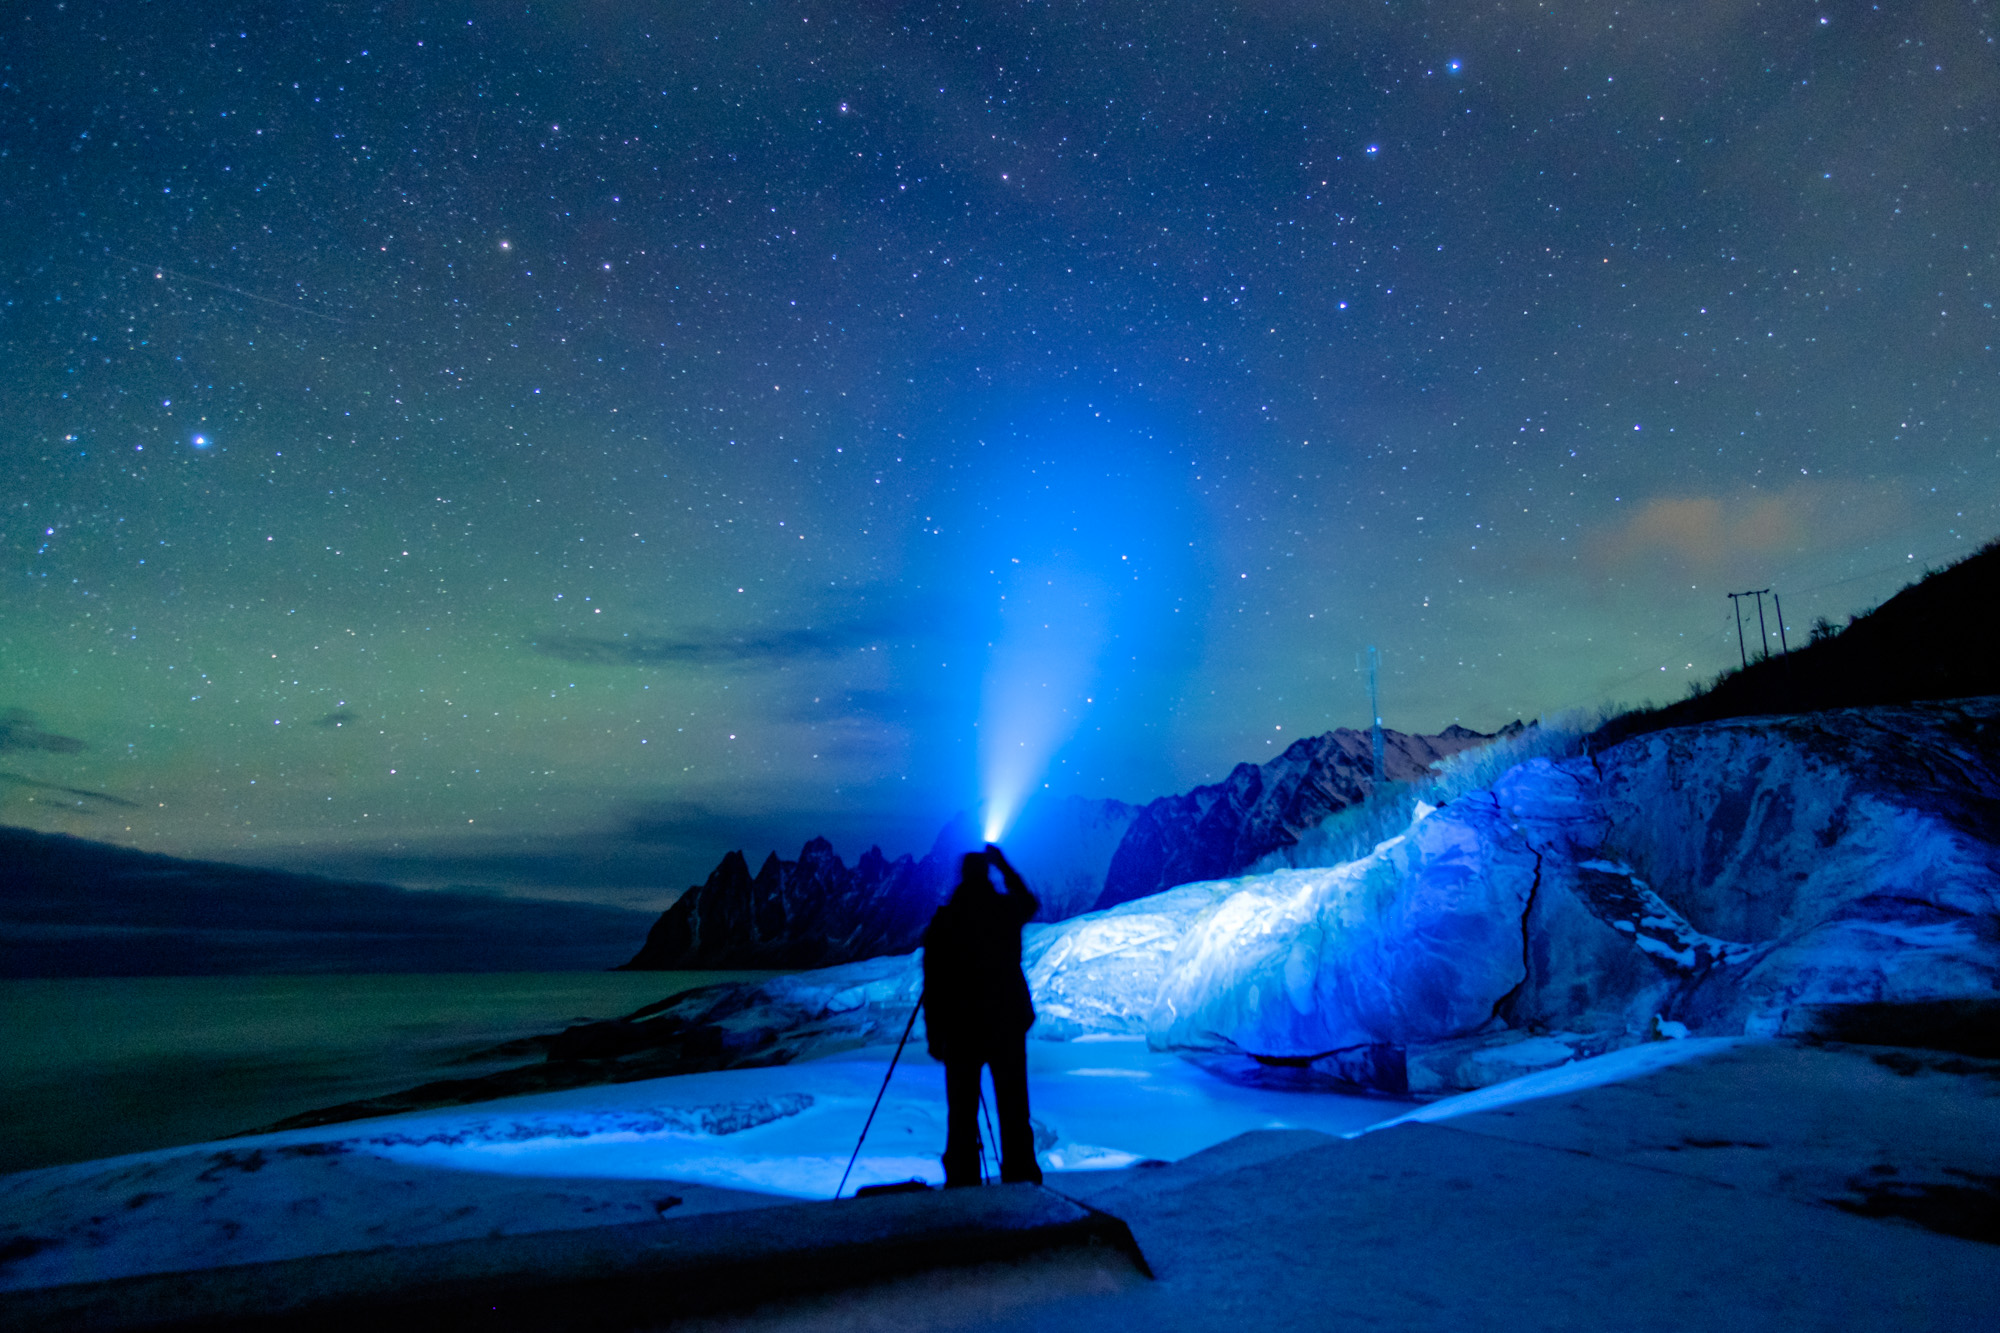 How to approach Night Photography in Winter - Visual Wilderness